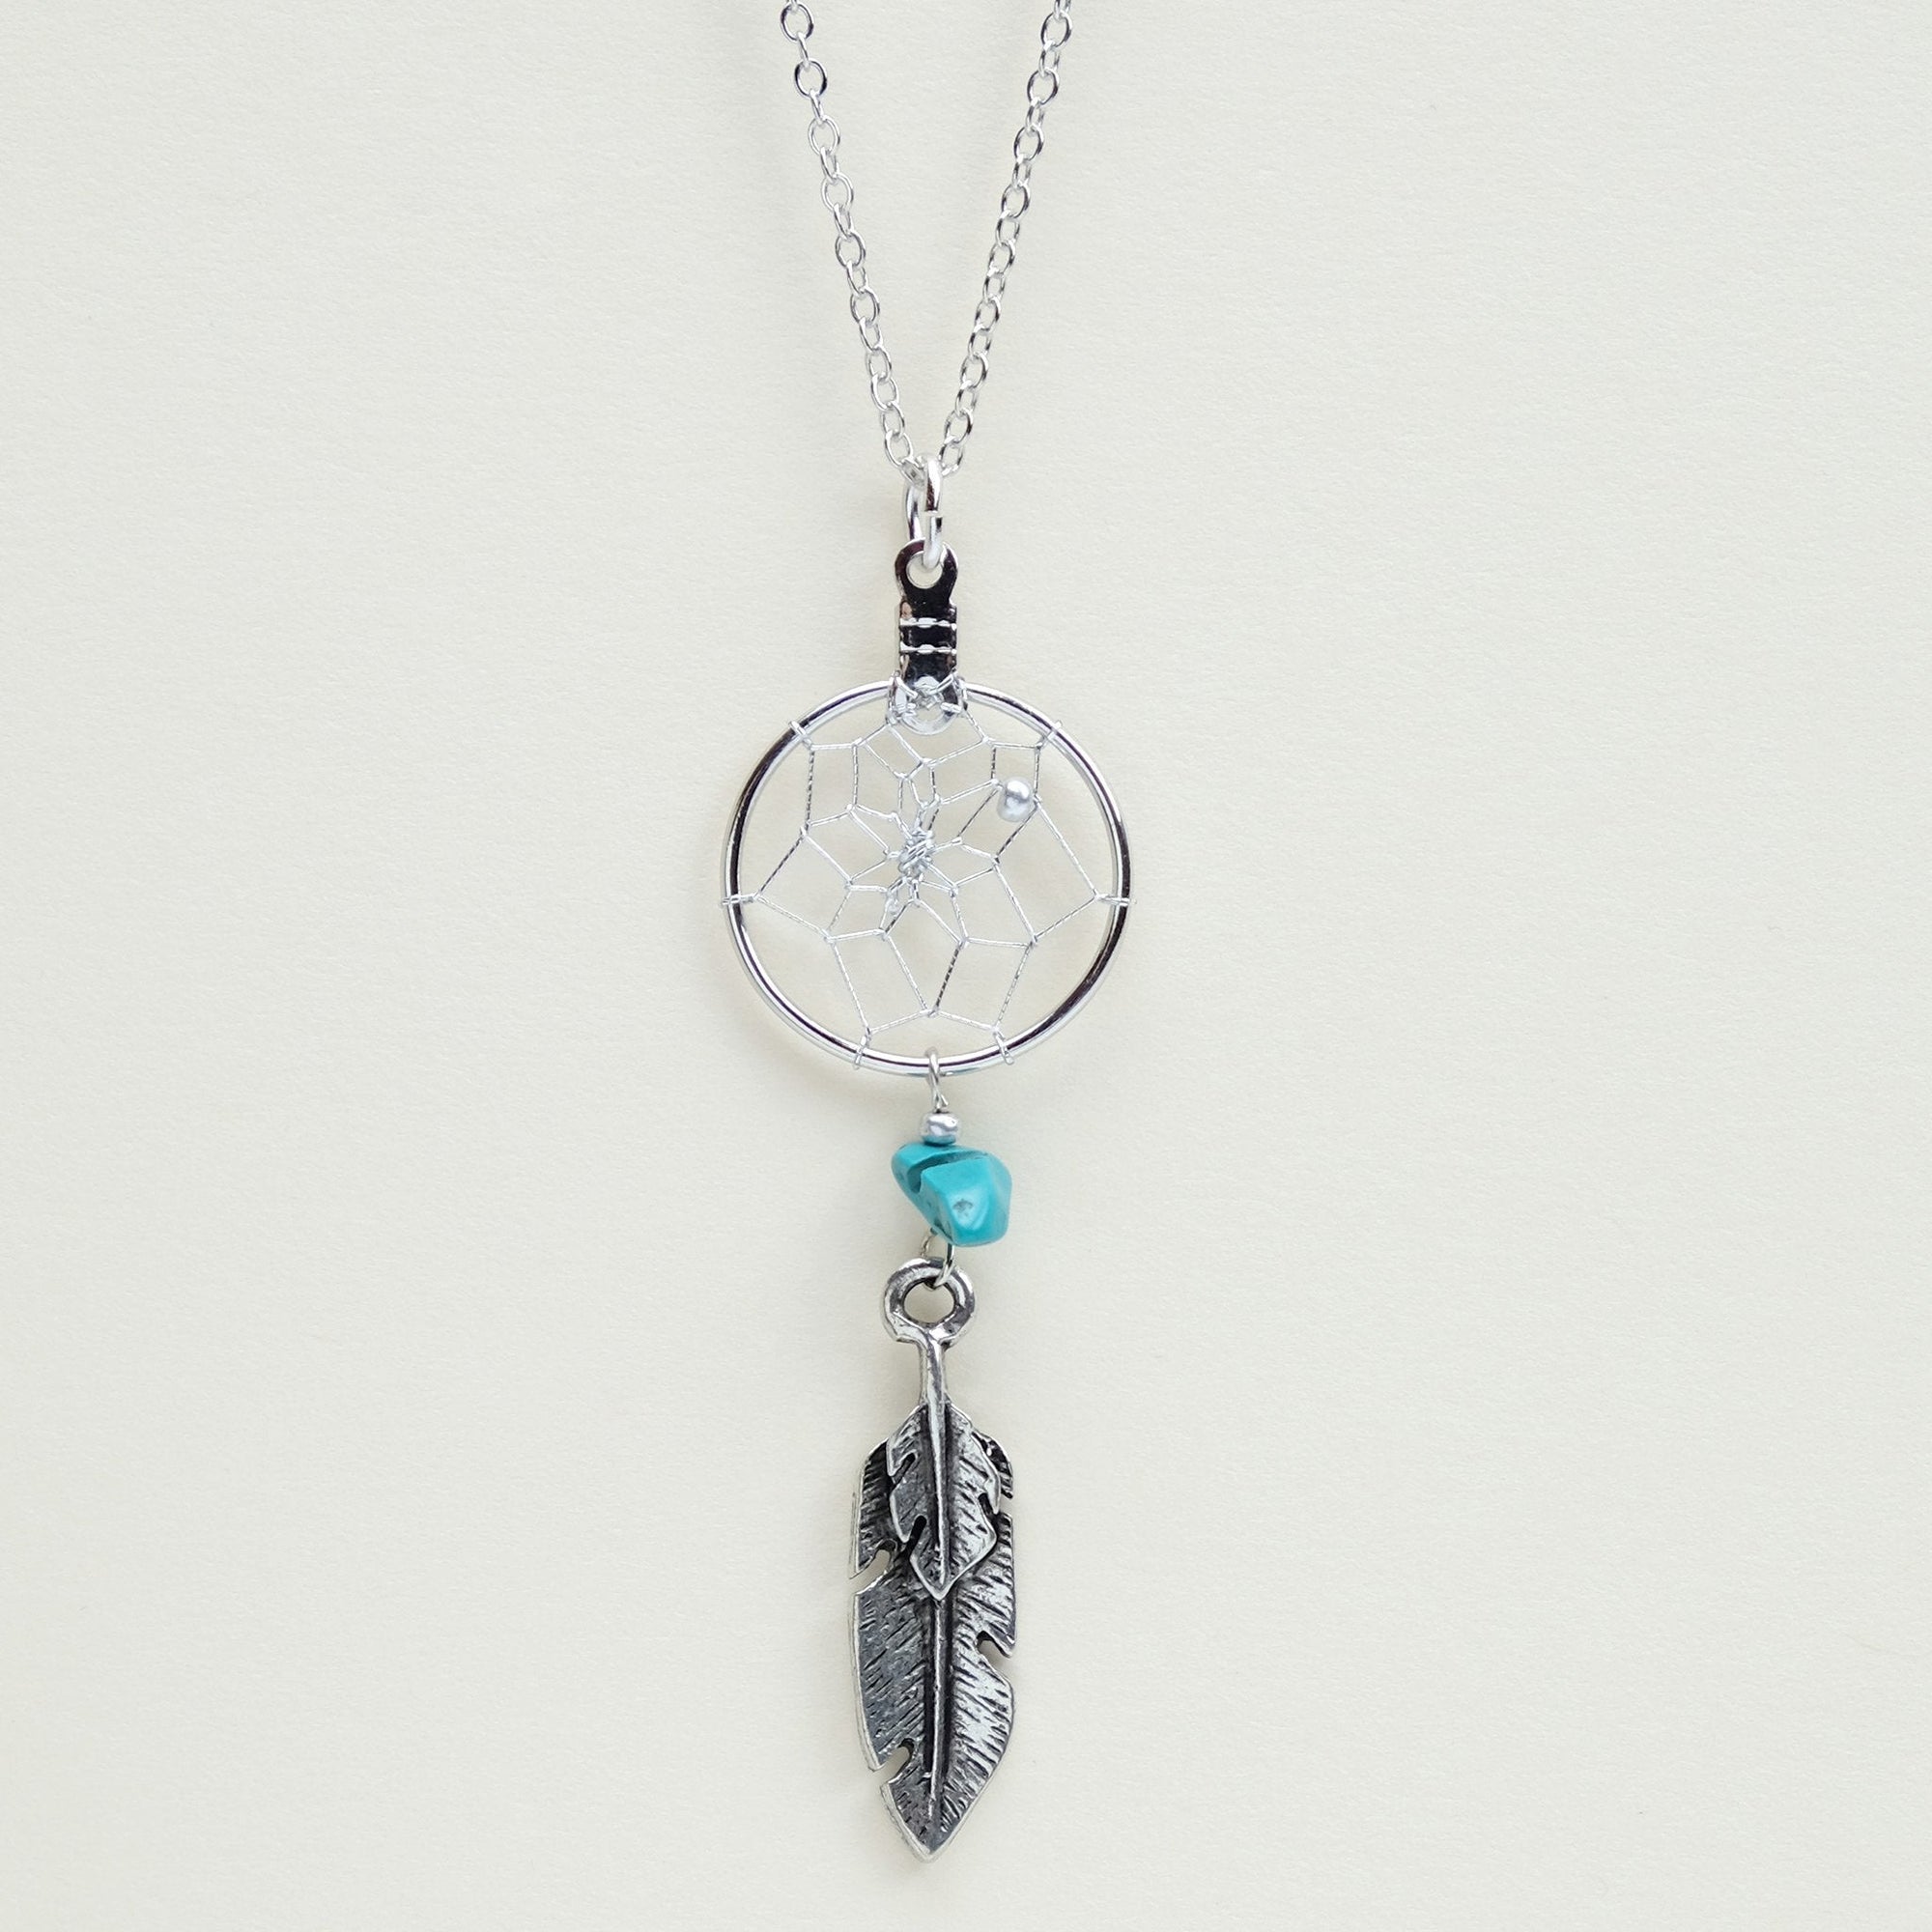 Dream Catcher Pendant Jewellery with Turquoise Semi-Precious Stones - Dream Catcher Pendant Jewellery with Turquoise Semi-Precious Stones -  - House of Himwitsa Native Art Gallery and Gifts